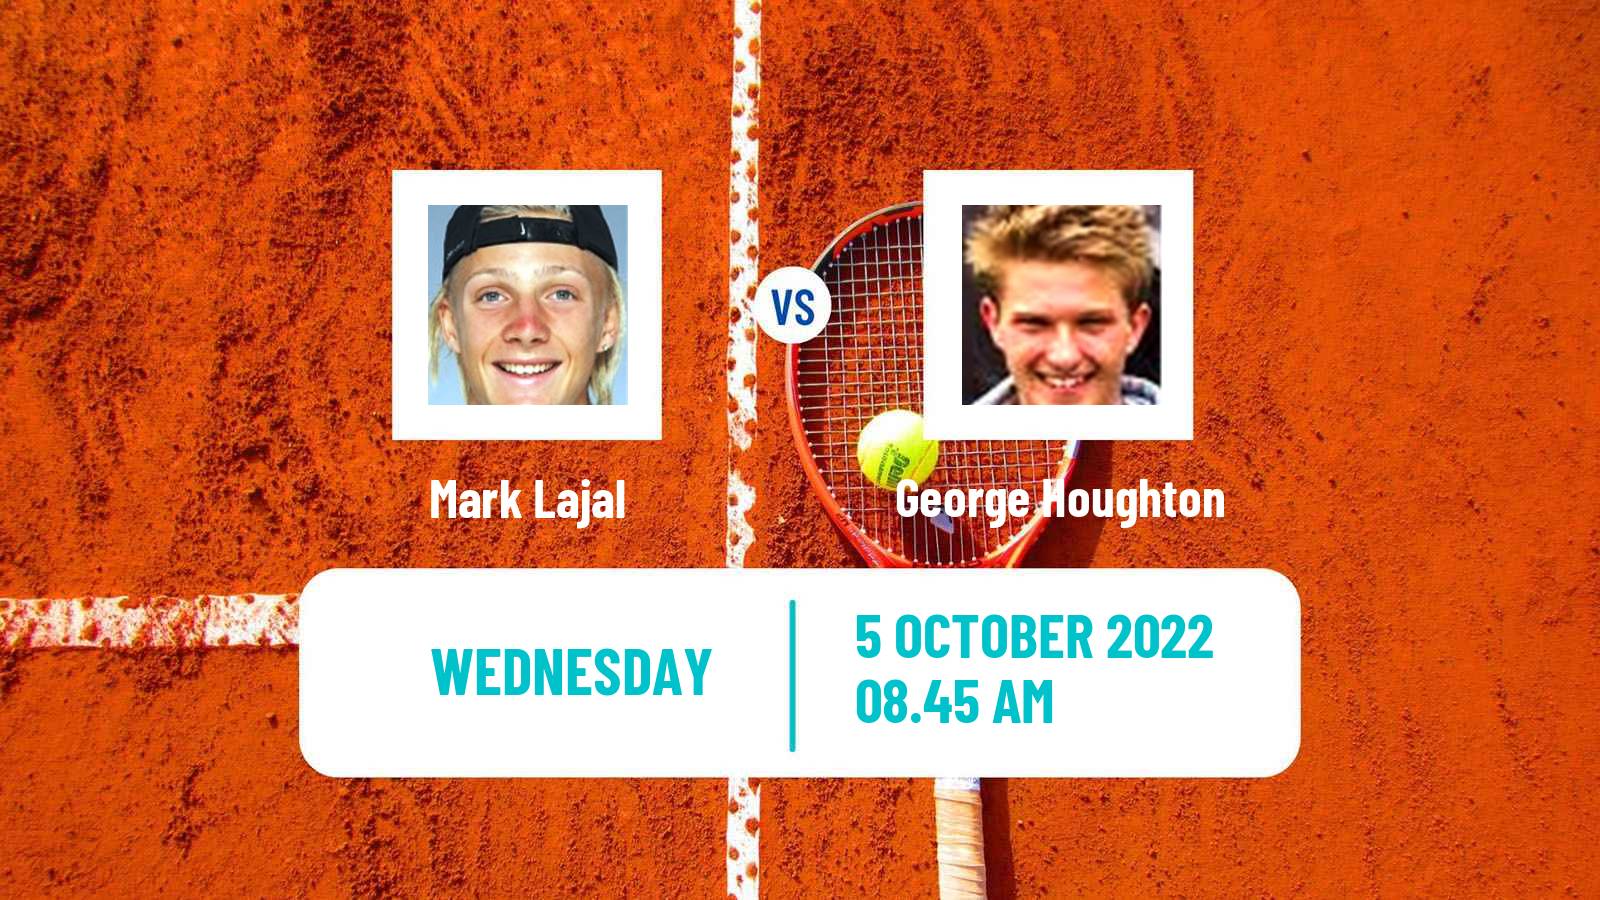 Tennis ITF Tournaments Mark Lajal - George Houghton